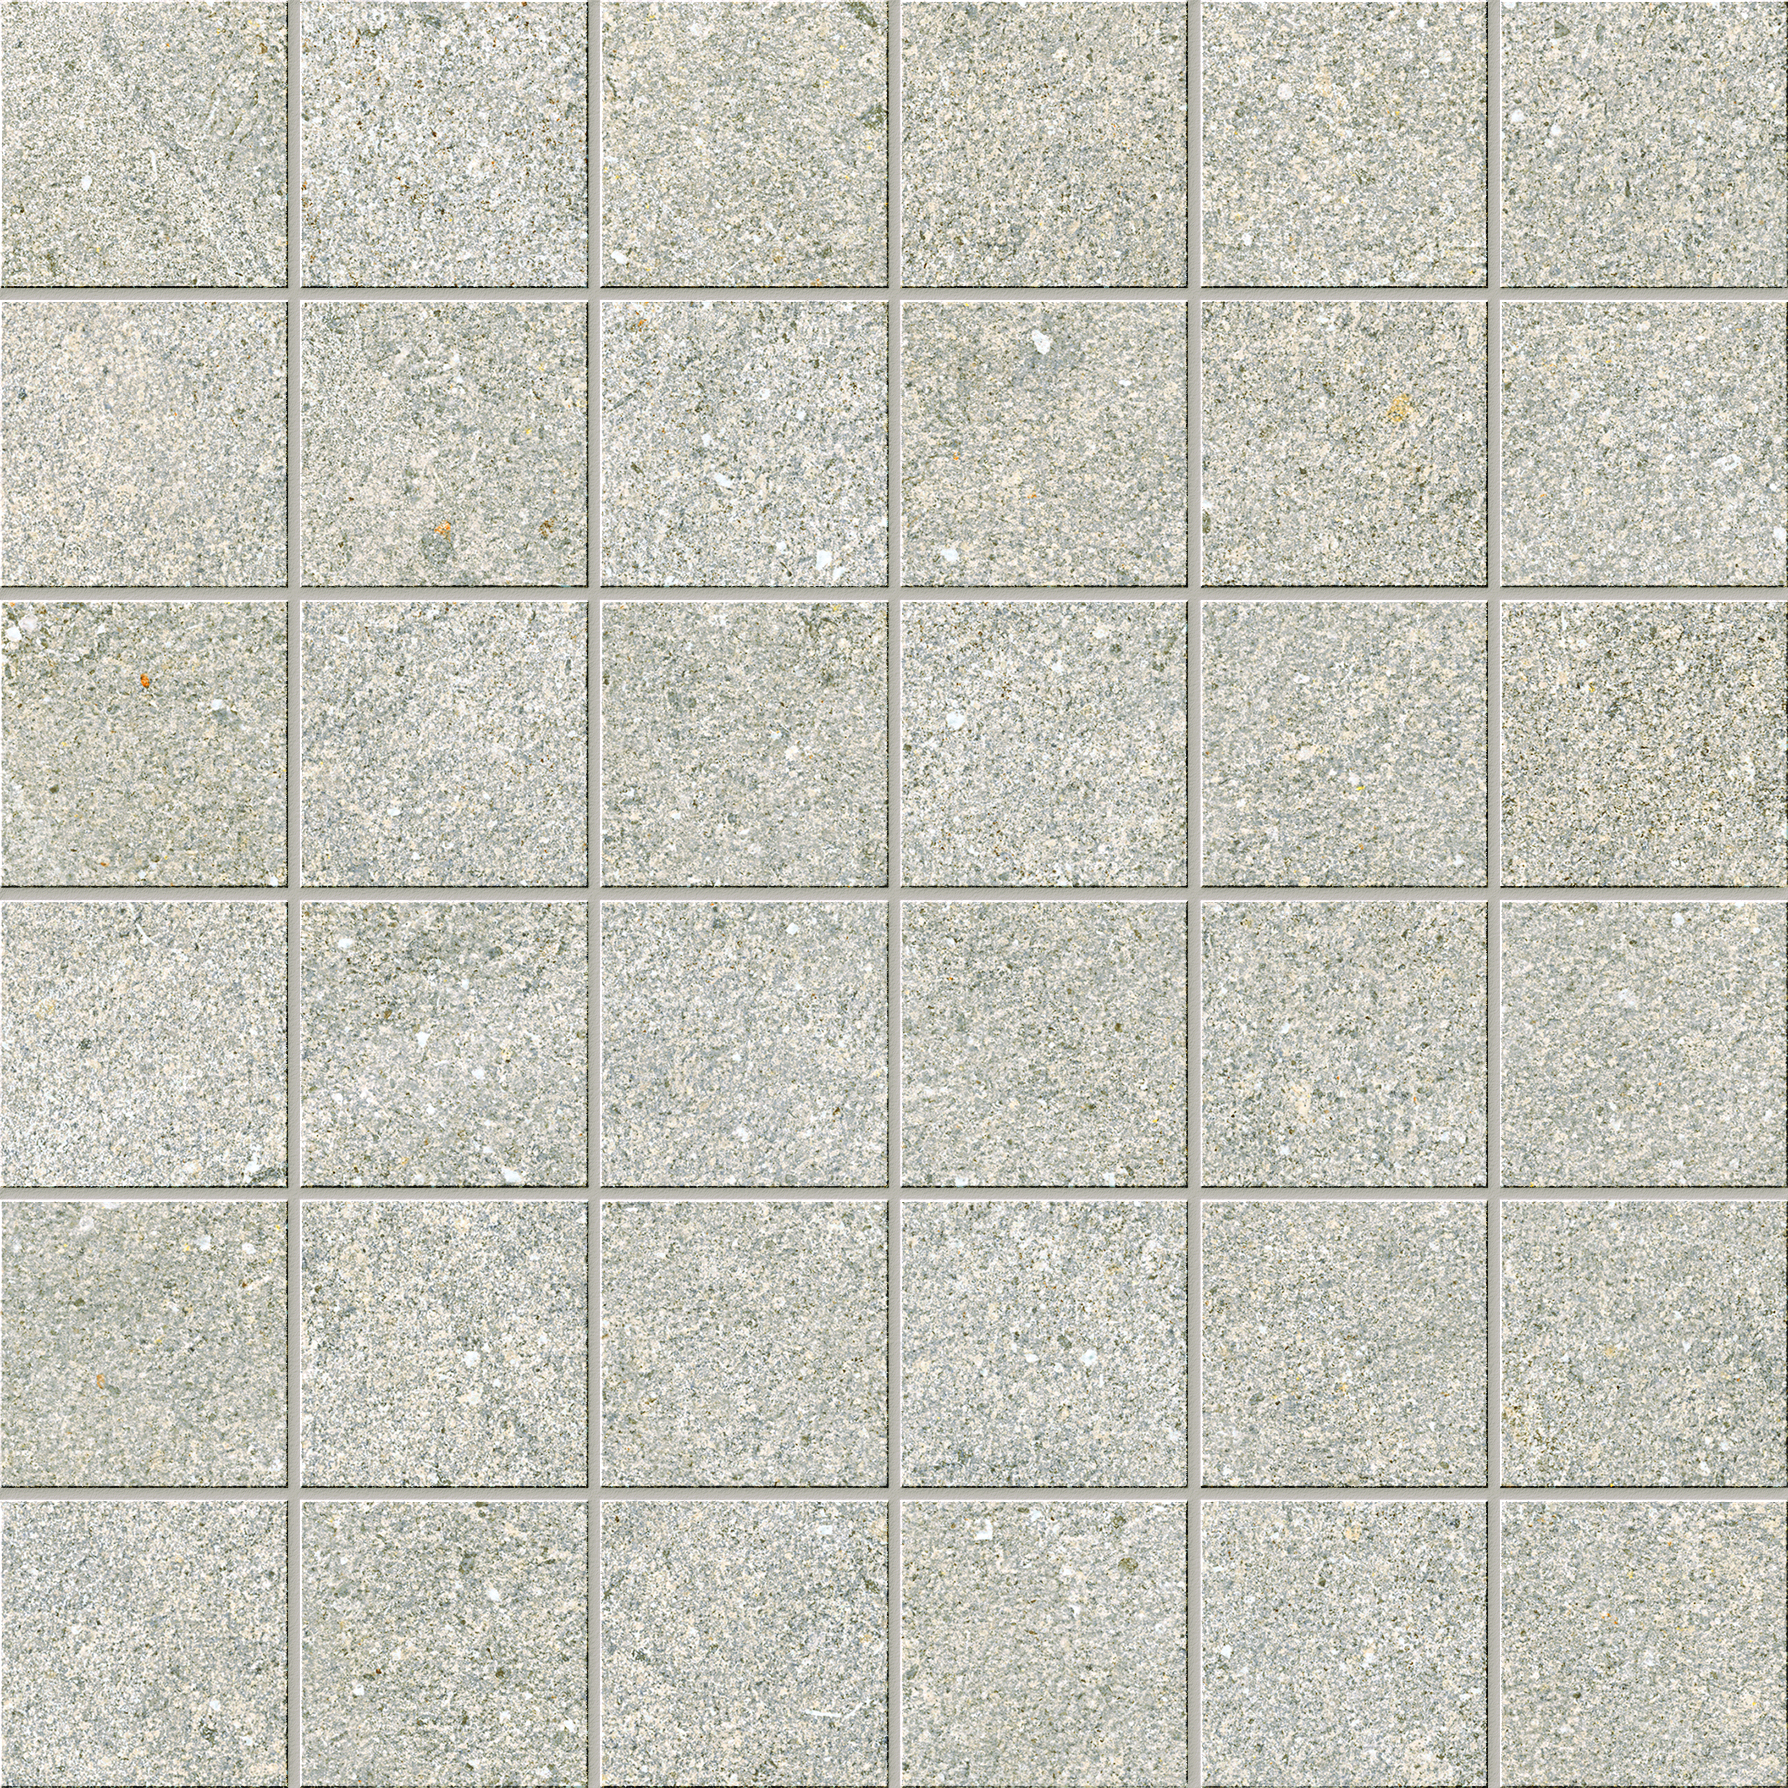 Serenissima Eclettica Argento Naturale Mosaic 5x5 1082038 30x30cm rectified 9,5mm